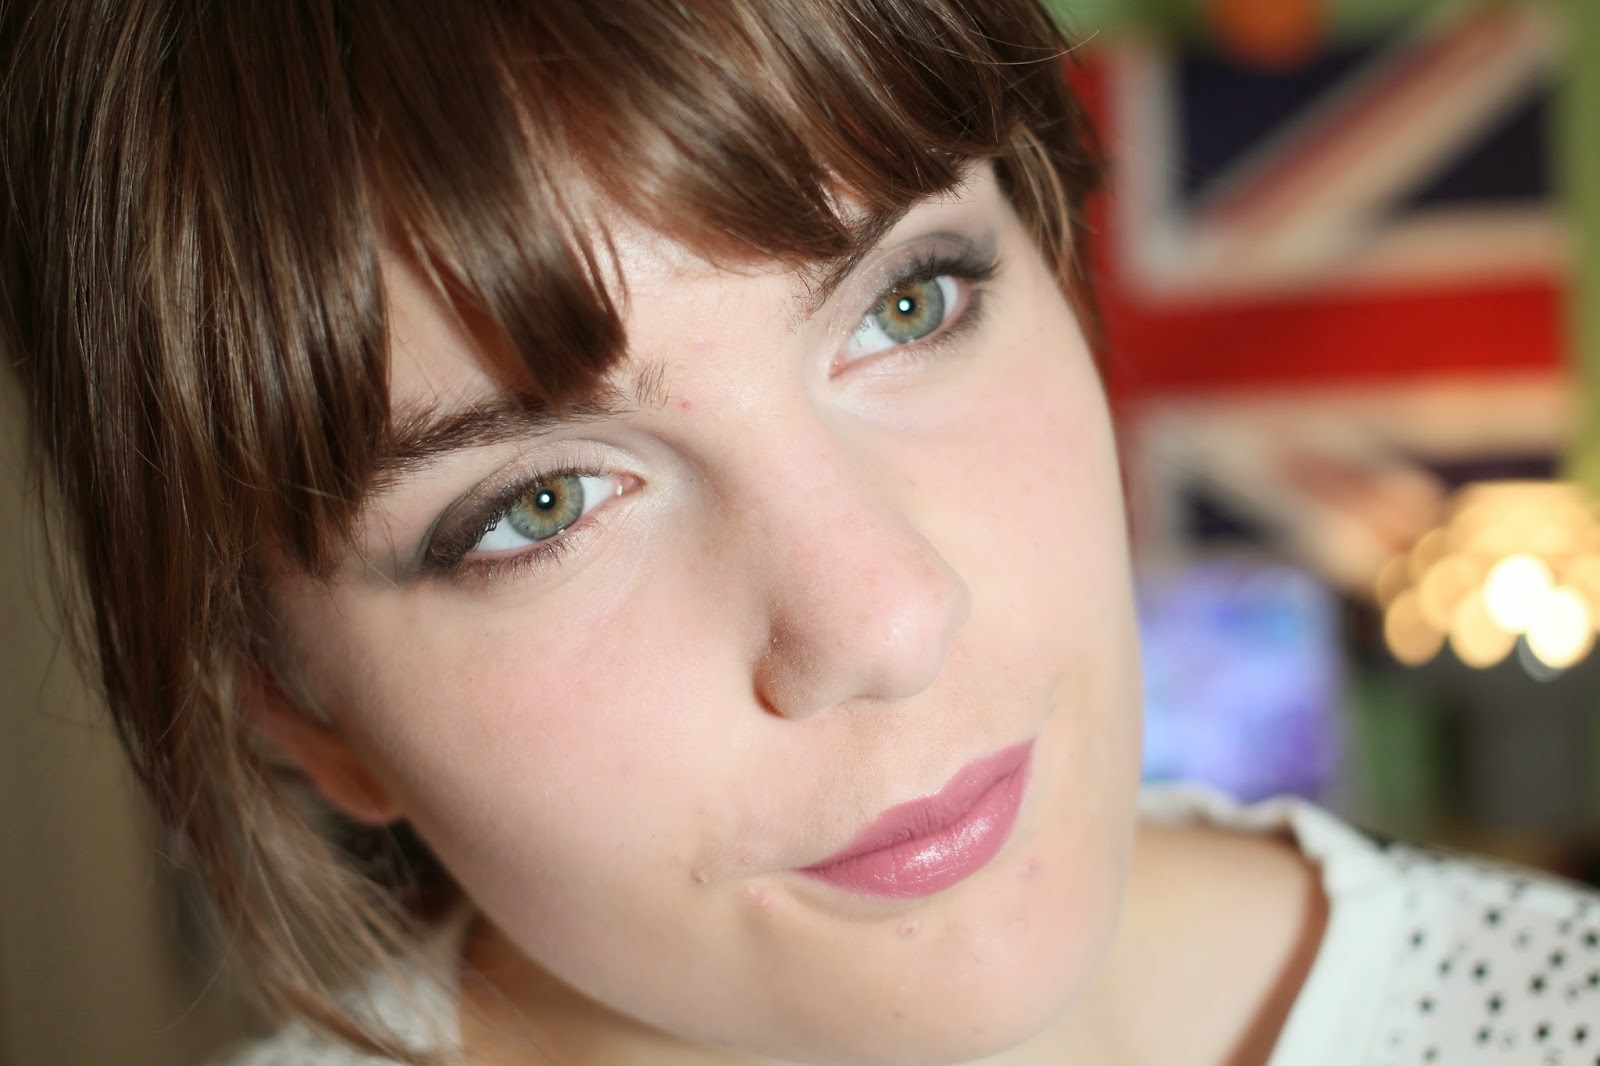 Rimmel makeup review, stay matte review, scandal eyes, color rush,